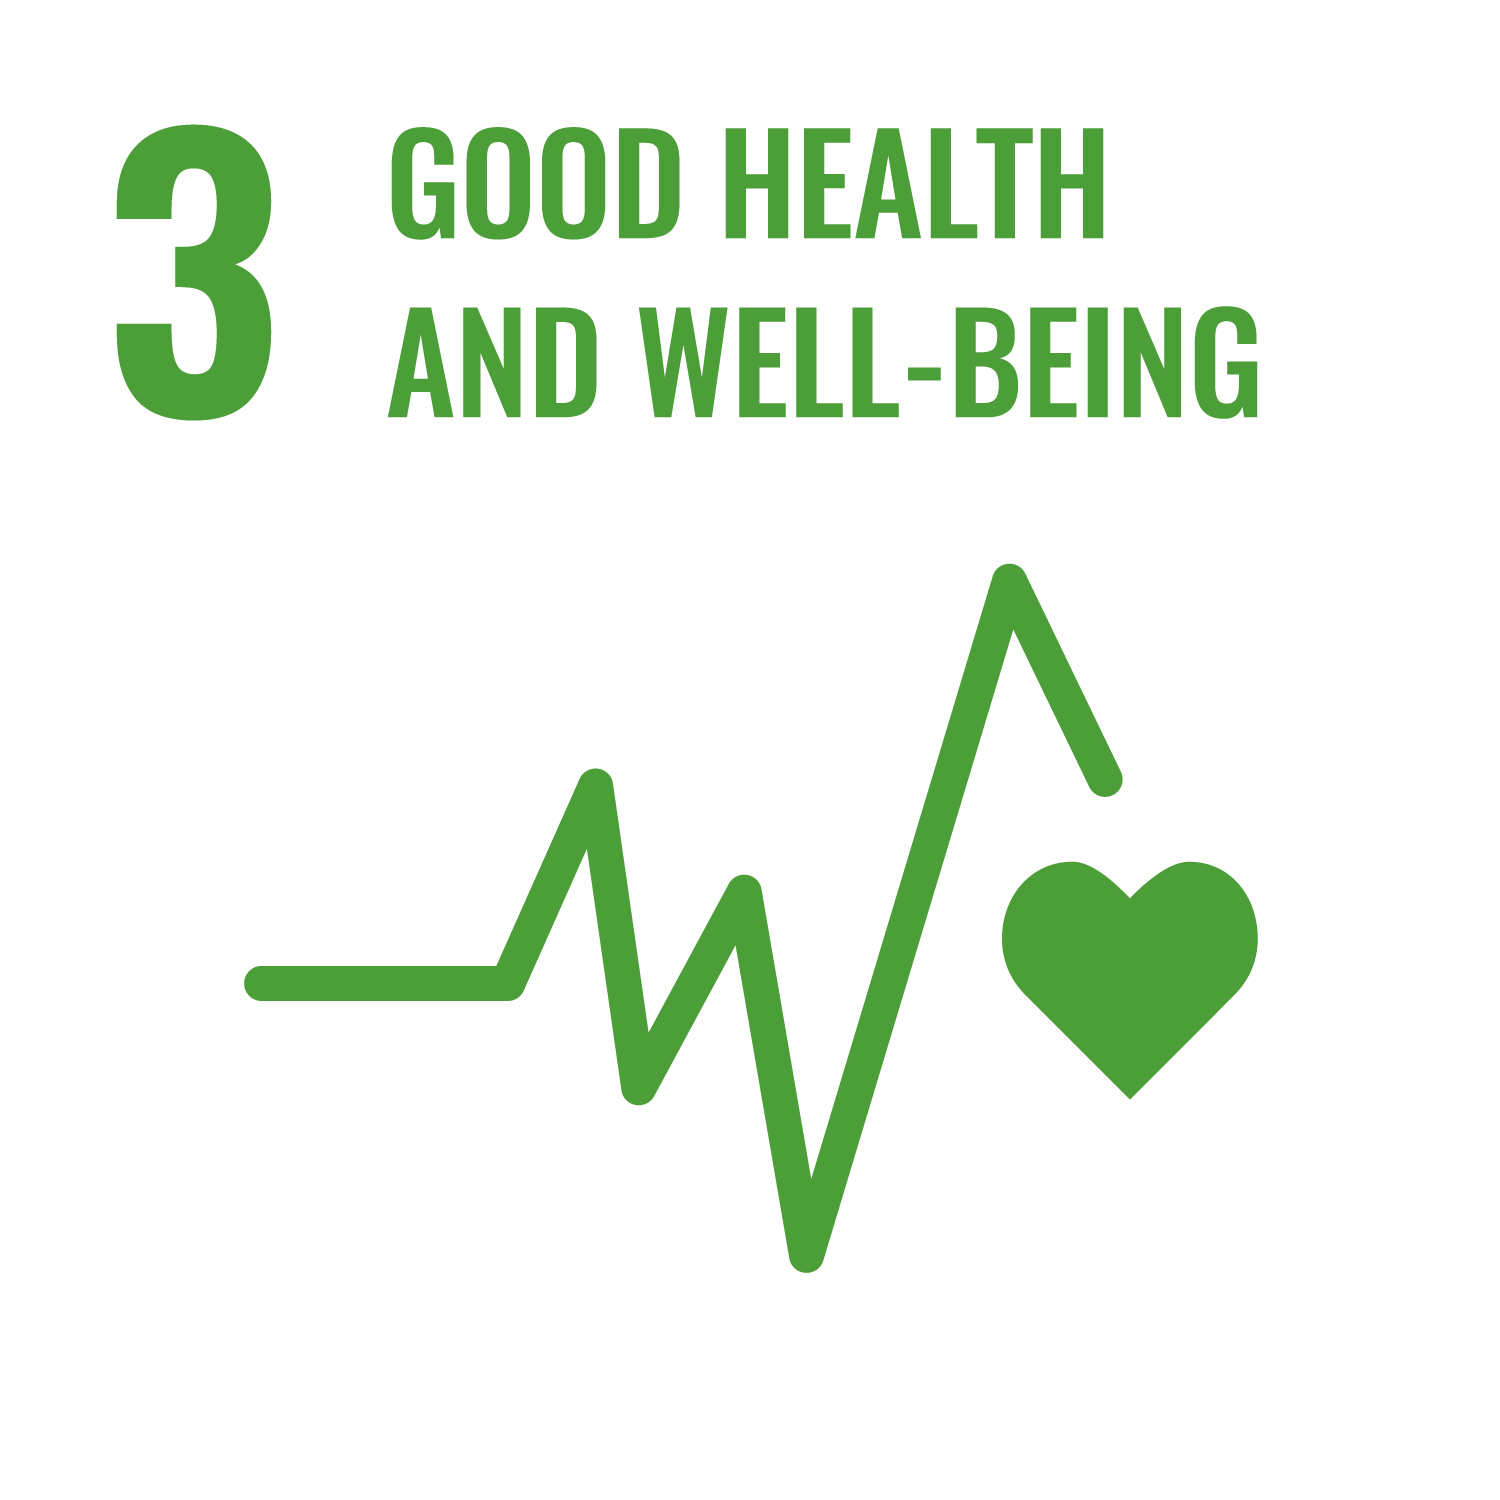 United Nations Development goals 3 Good Health and Well-being logo